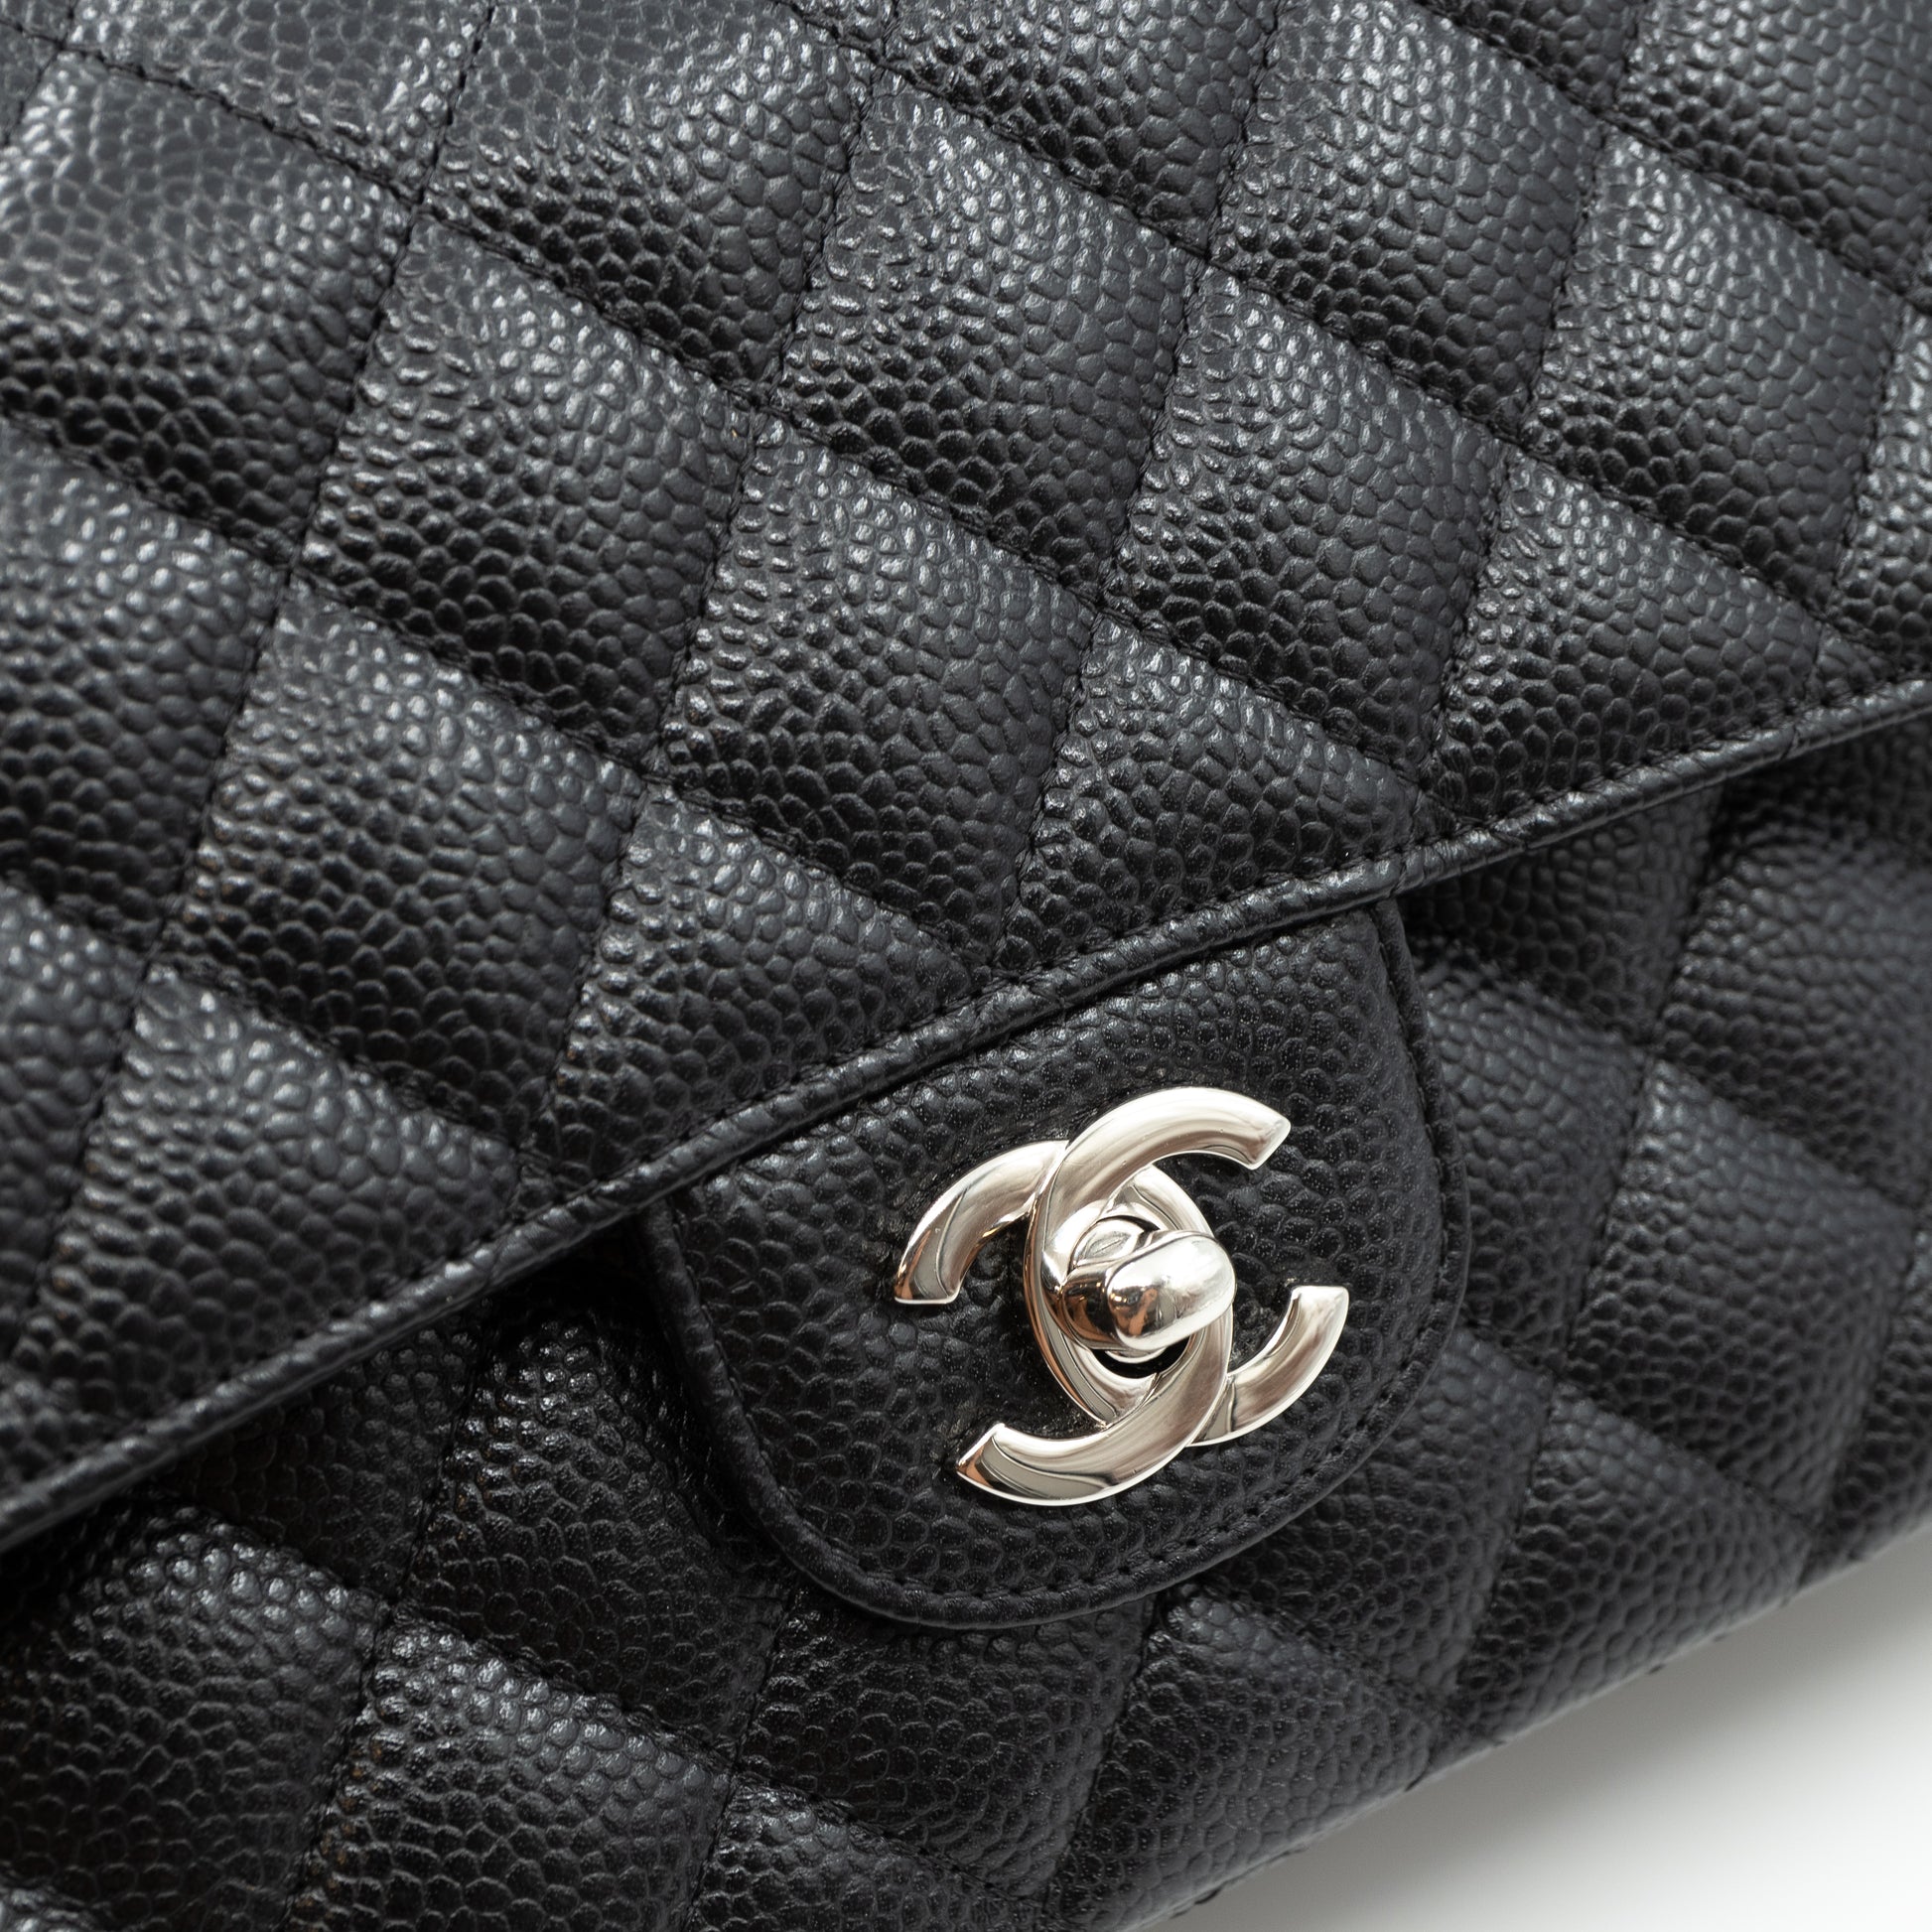 Chanel Classic Double Flap Bag Quilted Caviar Jumbo Black 437071